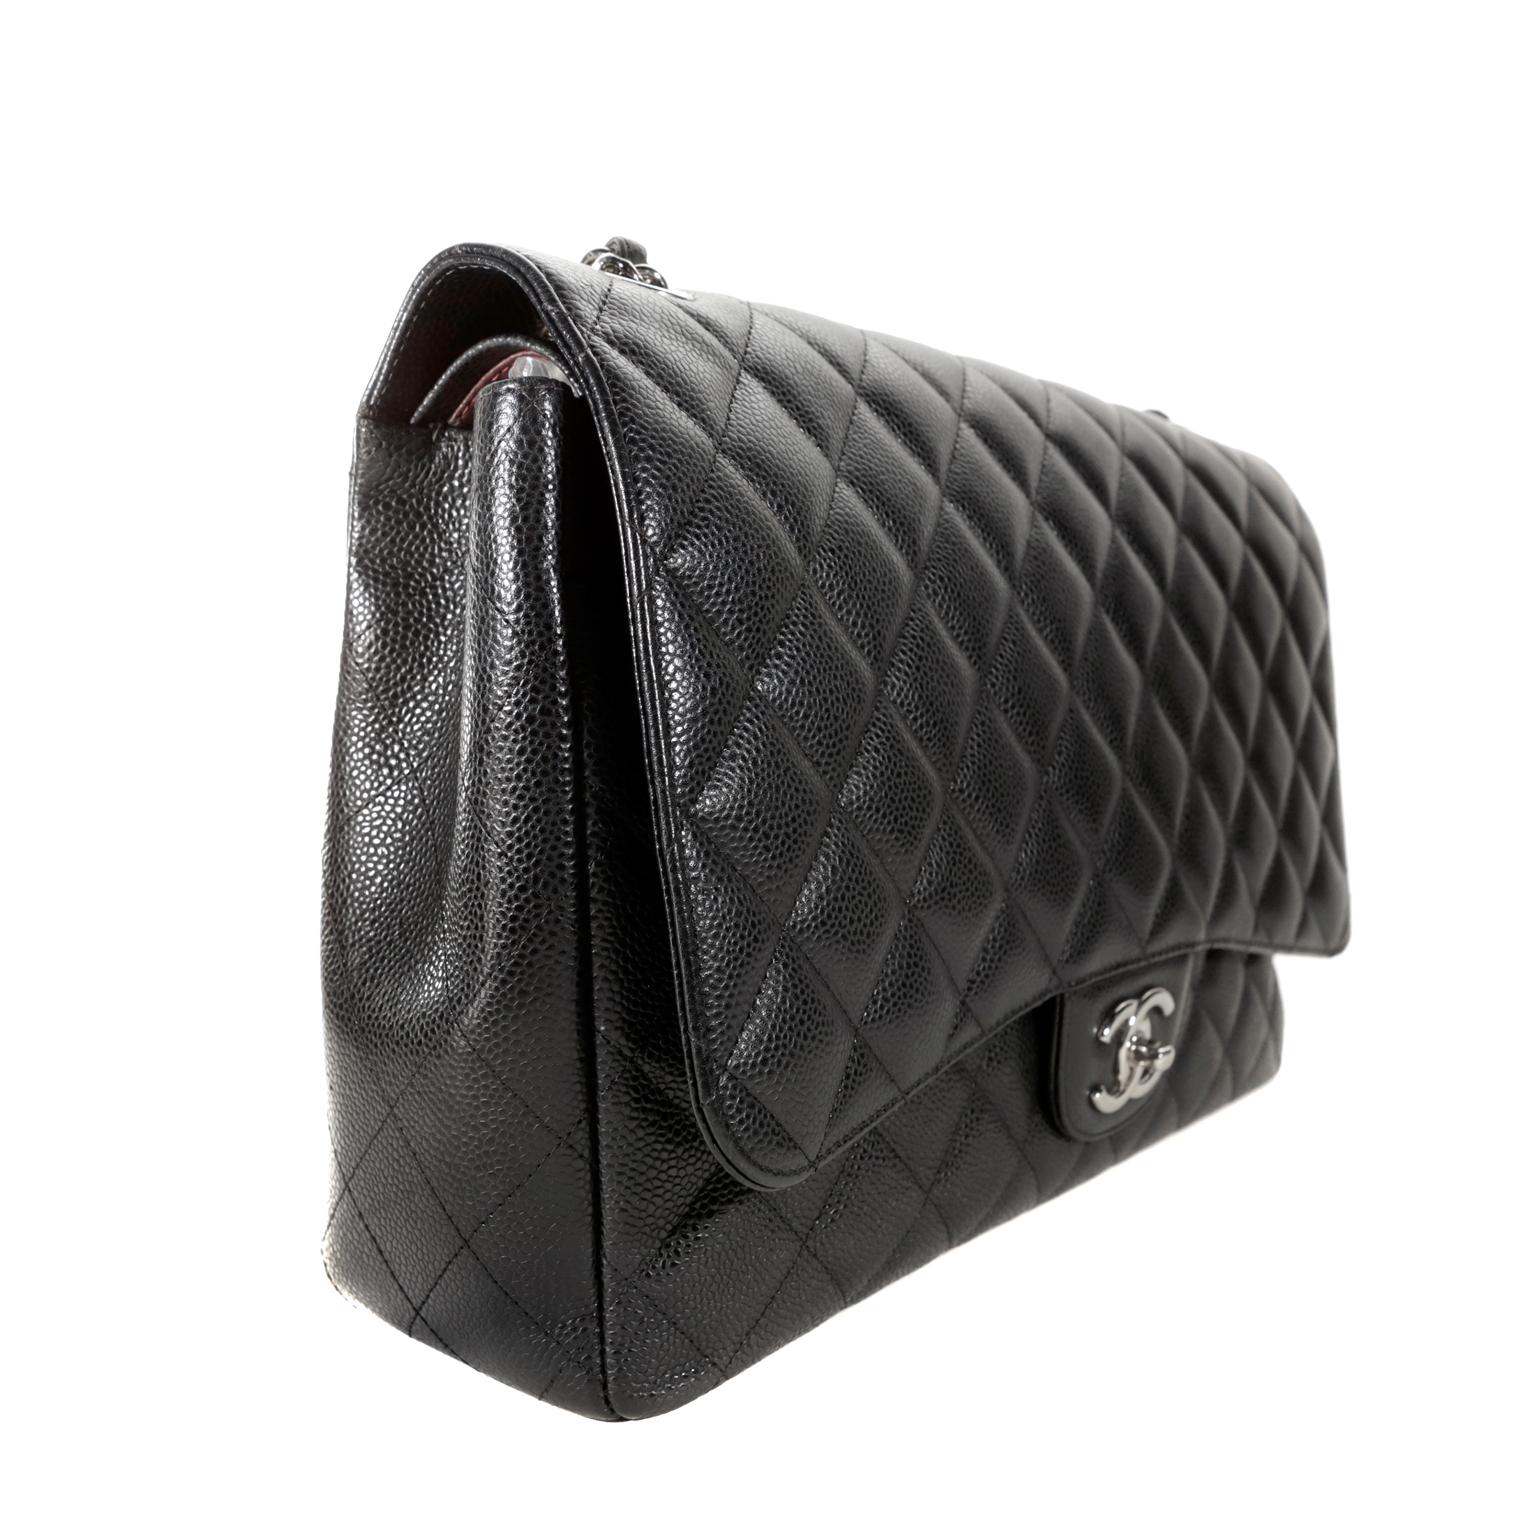 Chanel Black Caviar Maxi Classic- pristine condition
Chanel’s timeless classic flap in the maxi size with silver hardware is a must have in any collection.  
Durable black caviar leather is quilted in signature Chanel diamond pattern.  Silver